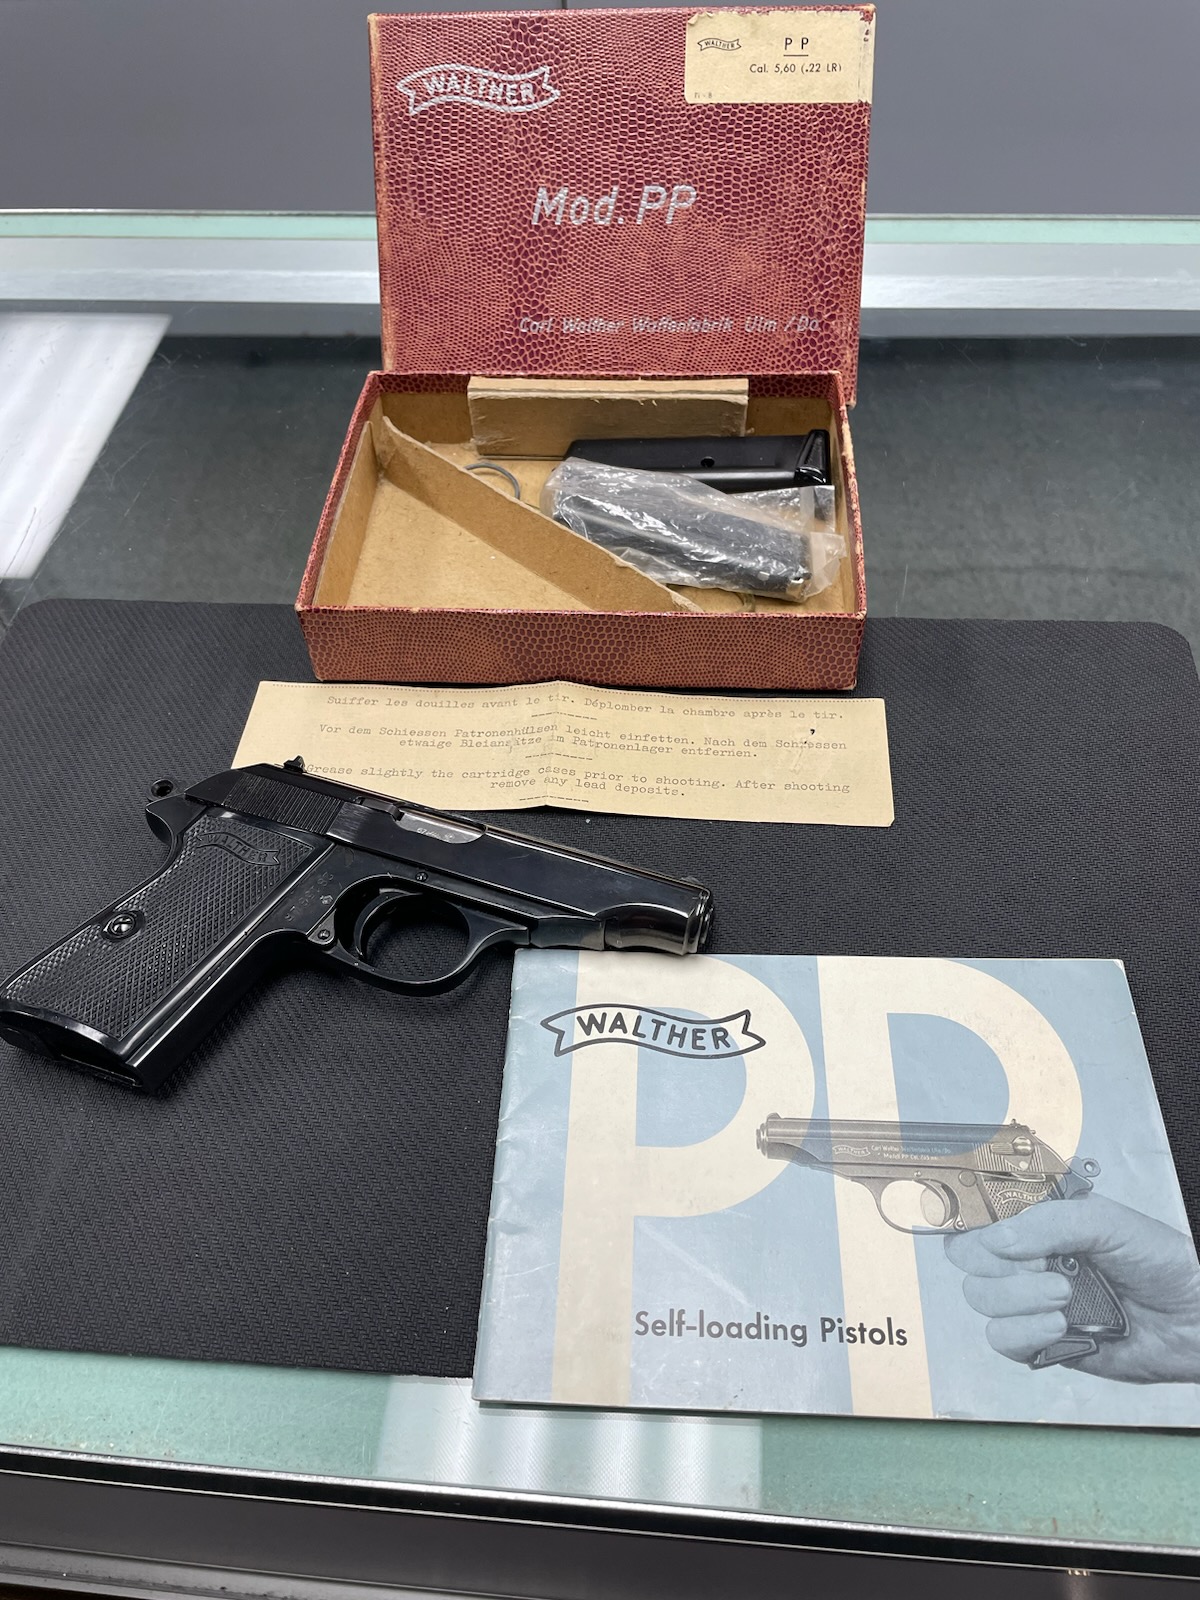 Walther PP .22LR Semi-Automatic Pistol